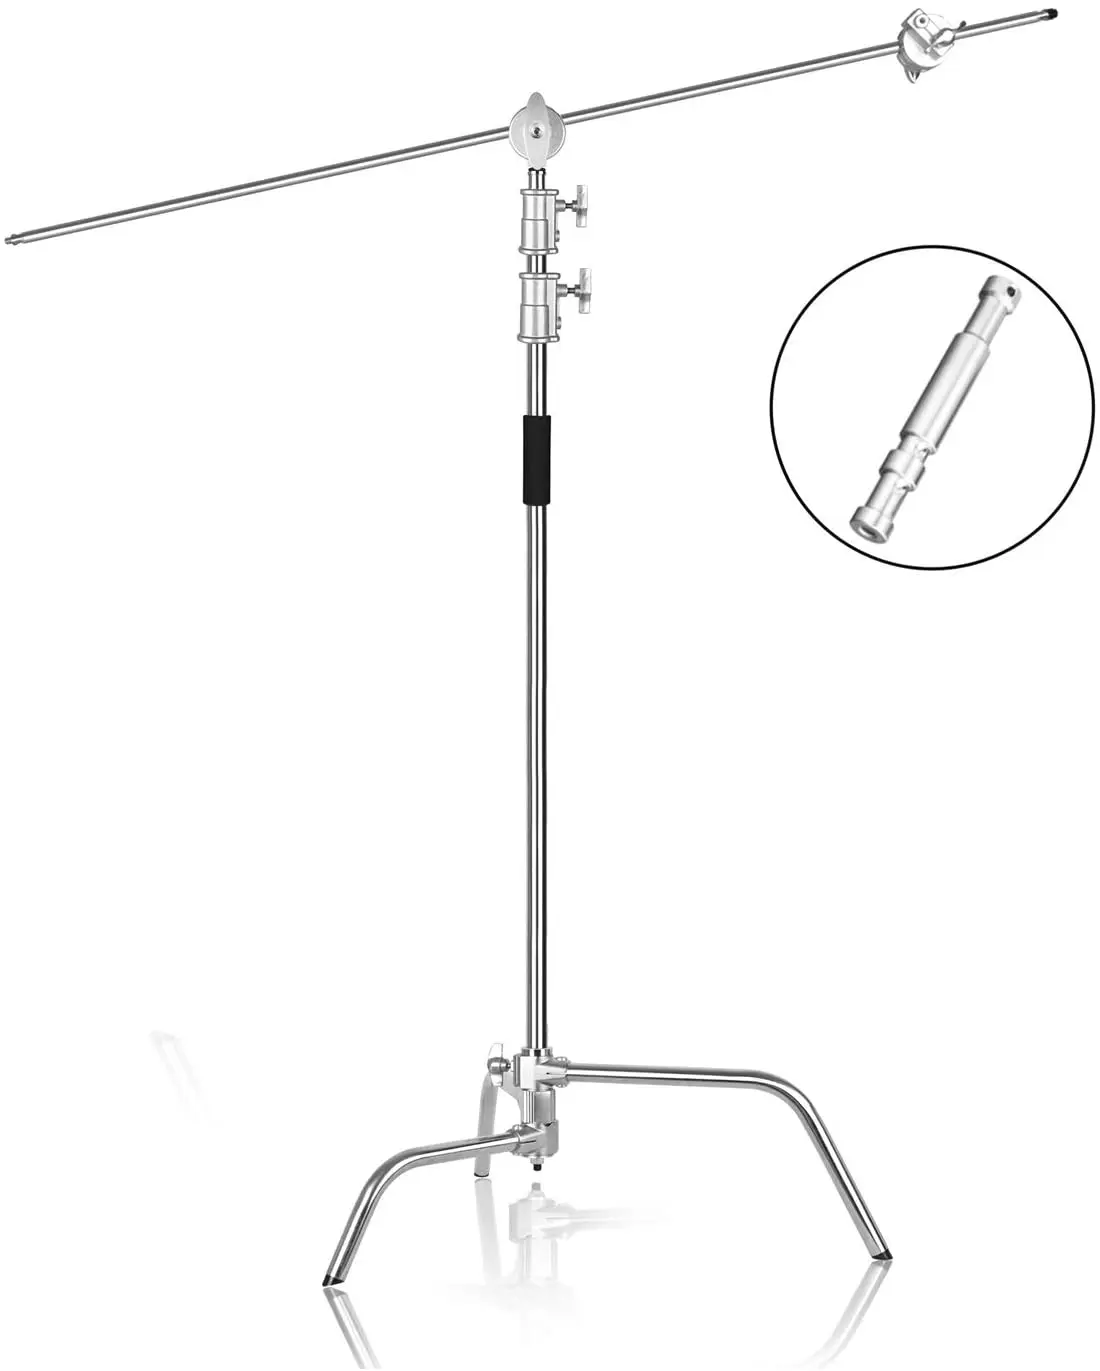 Soonpho 100% Metal Max Height 9.8ft/300cm Adjustable Reflector C-Stand with 4.2ft/128cm Holding Arm and 2 Pieces Grip Head,One Adjustable Leg,for Photography Studio Video Reflector,Monolight,Softboxes 